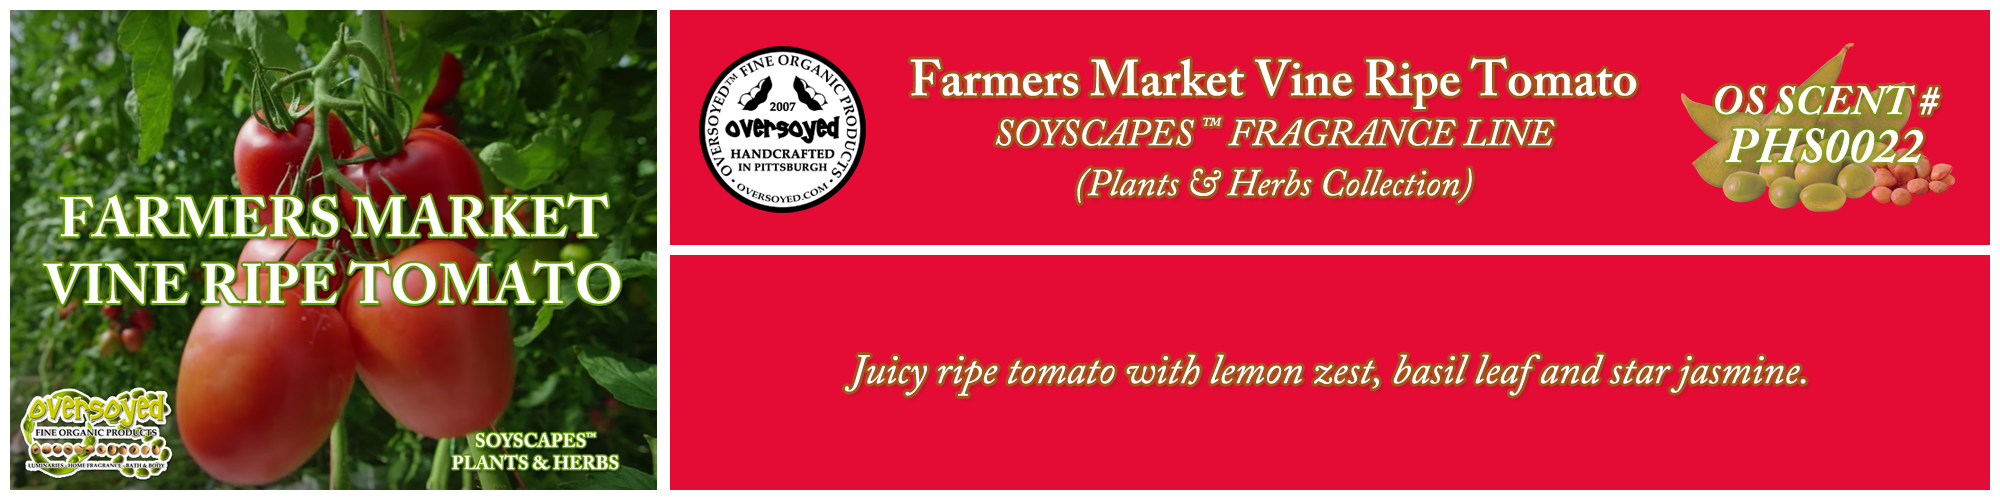 Farmers Market Vine Ripe Tomato Handcrafted Products Collection